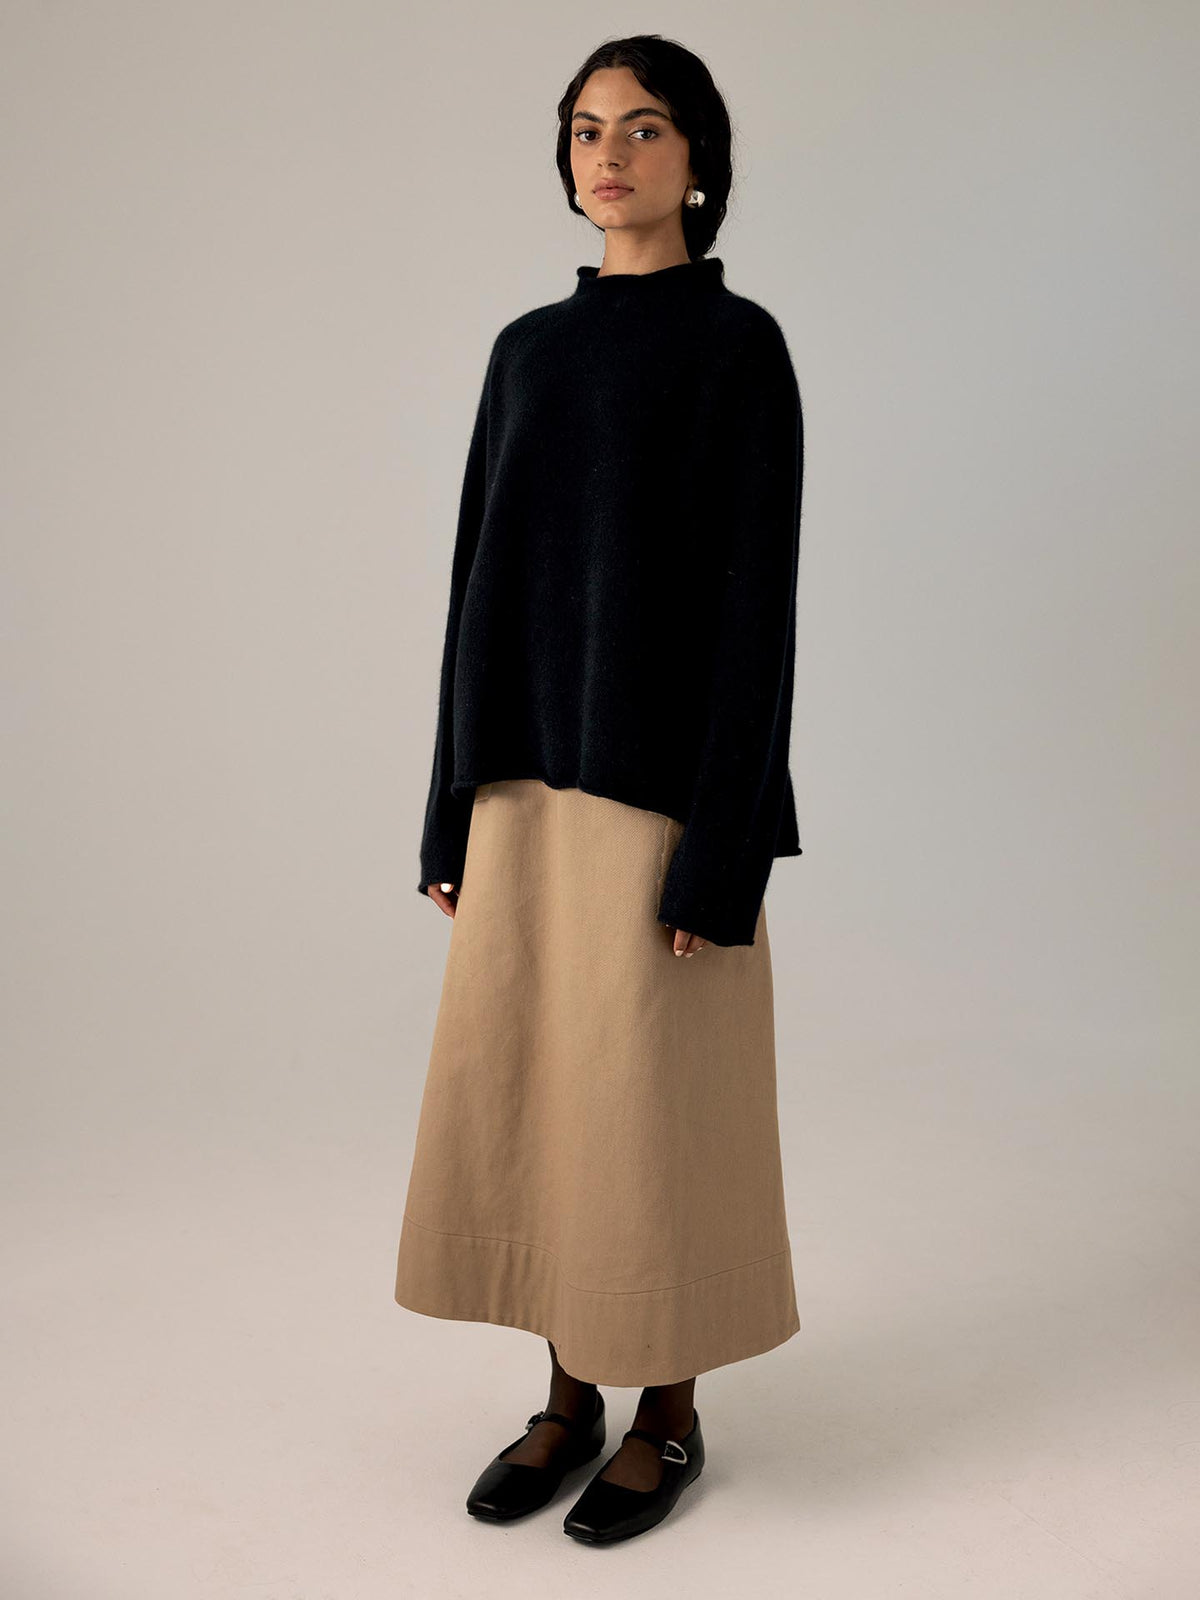 A petite woman in a Francie black Eclipse Knit sweater and beige skirt stands on a light gray background. She is wearing black shoes and looking at the camera.